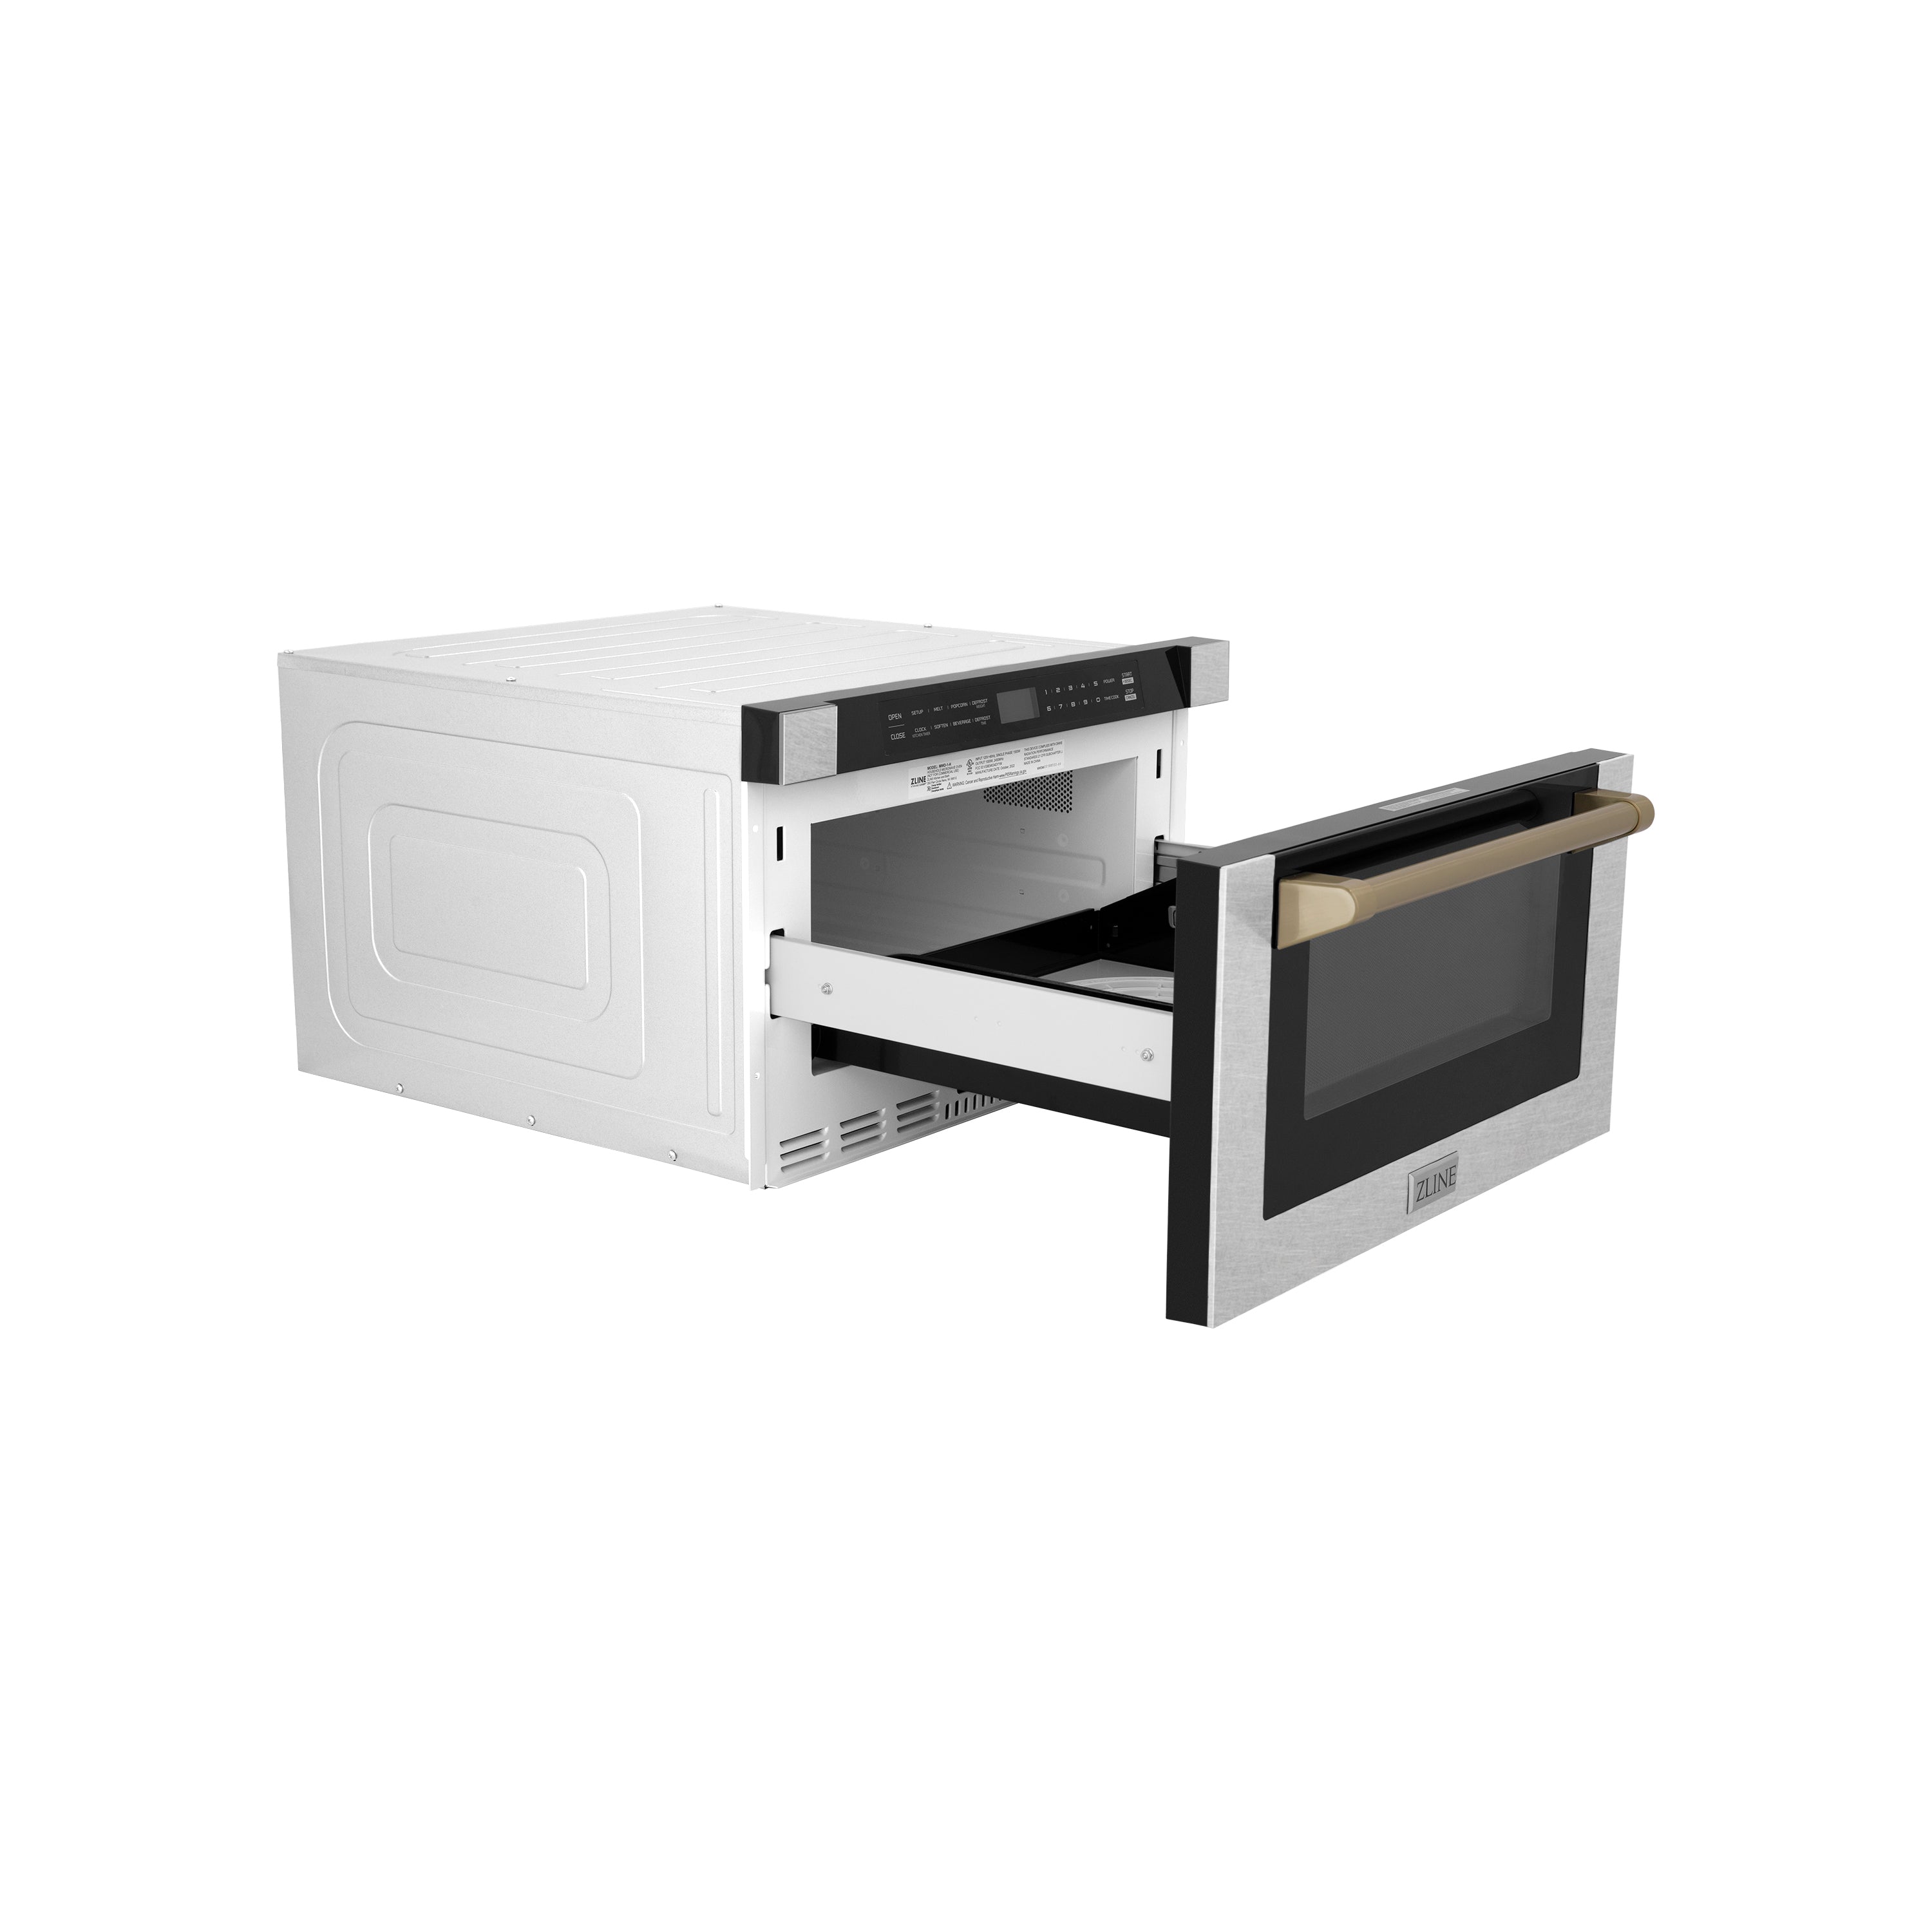 ZLINE Autograph Edition 24" 1.2 cu. ft. Built-in Microwave Drawer with a Traditional Handle in Fingerprint Resistant Stainless Steel and Champagne Bronze Accents